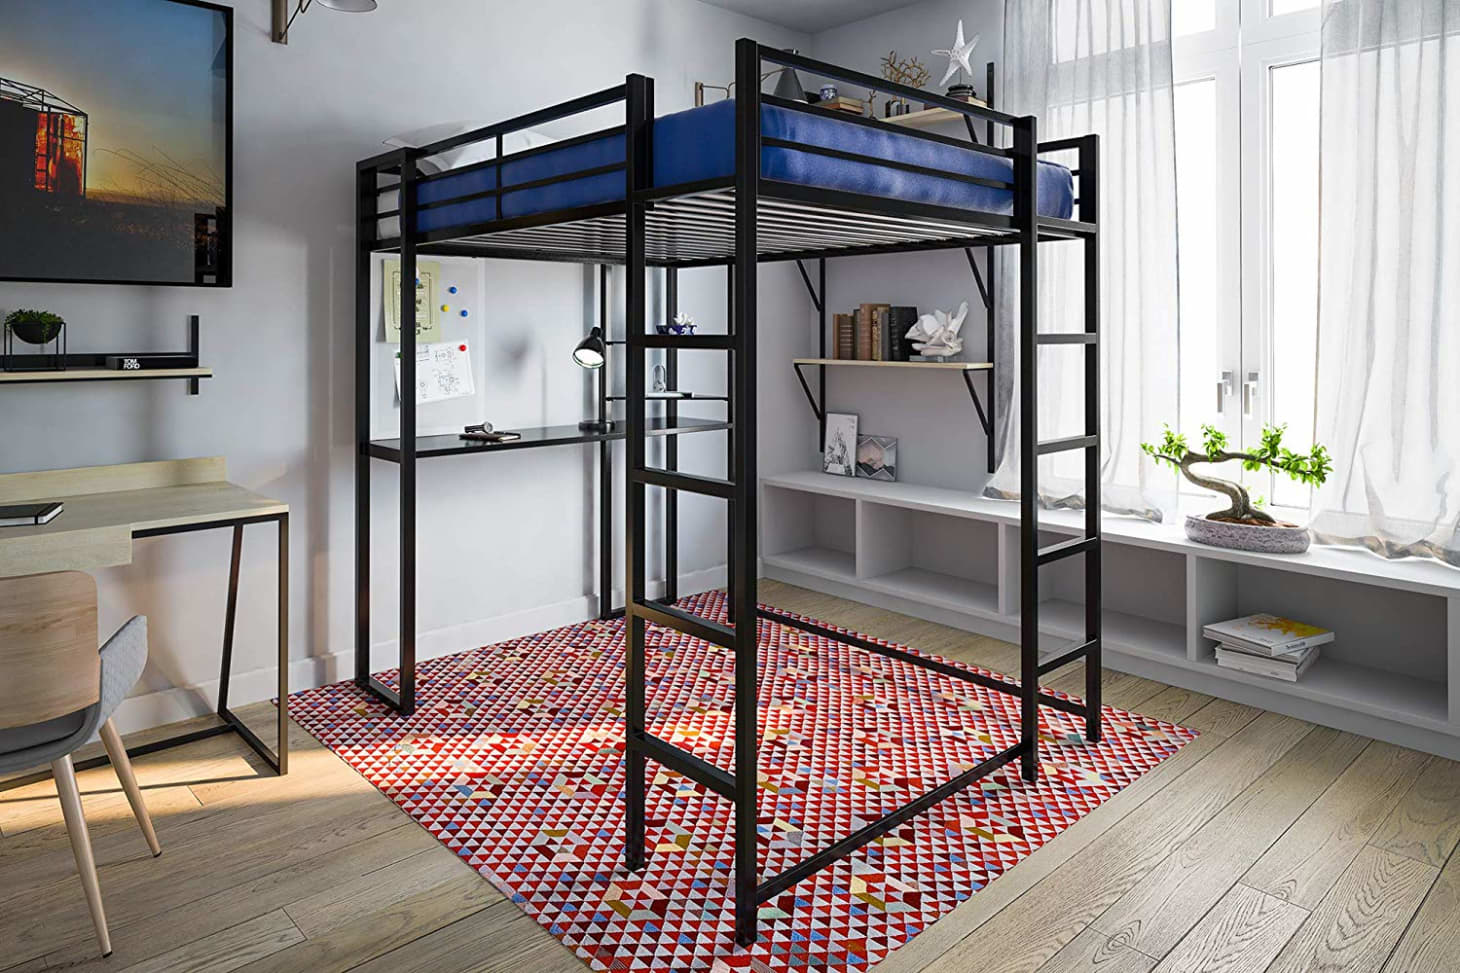 11 Full Size Modern Loft Beds for Adults | Apartment Therapy